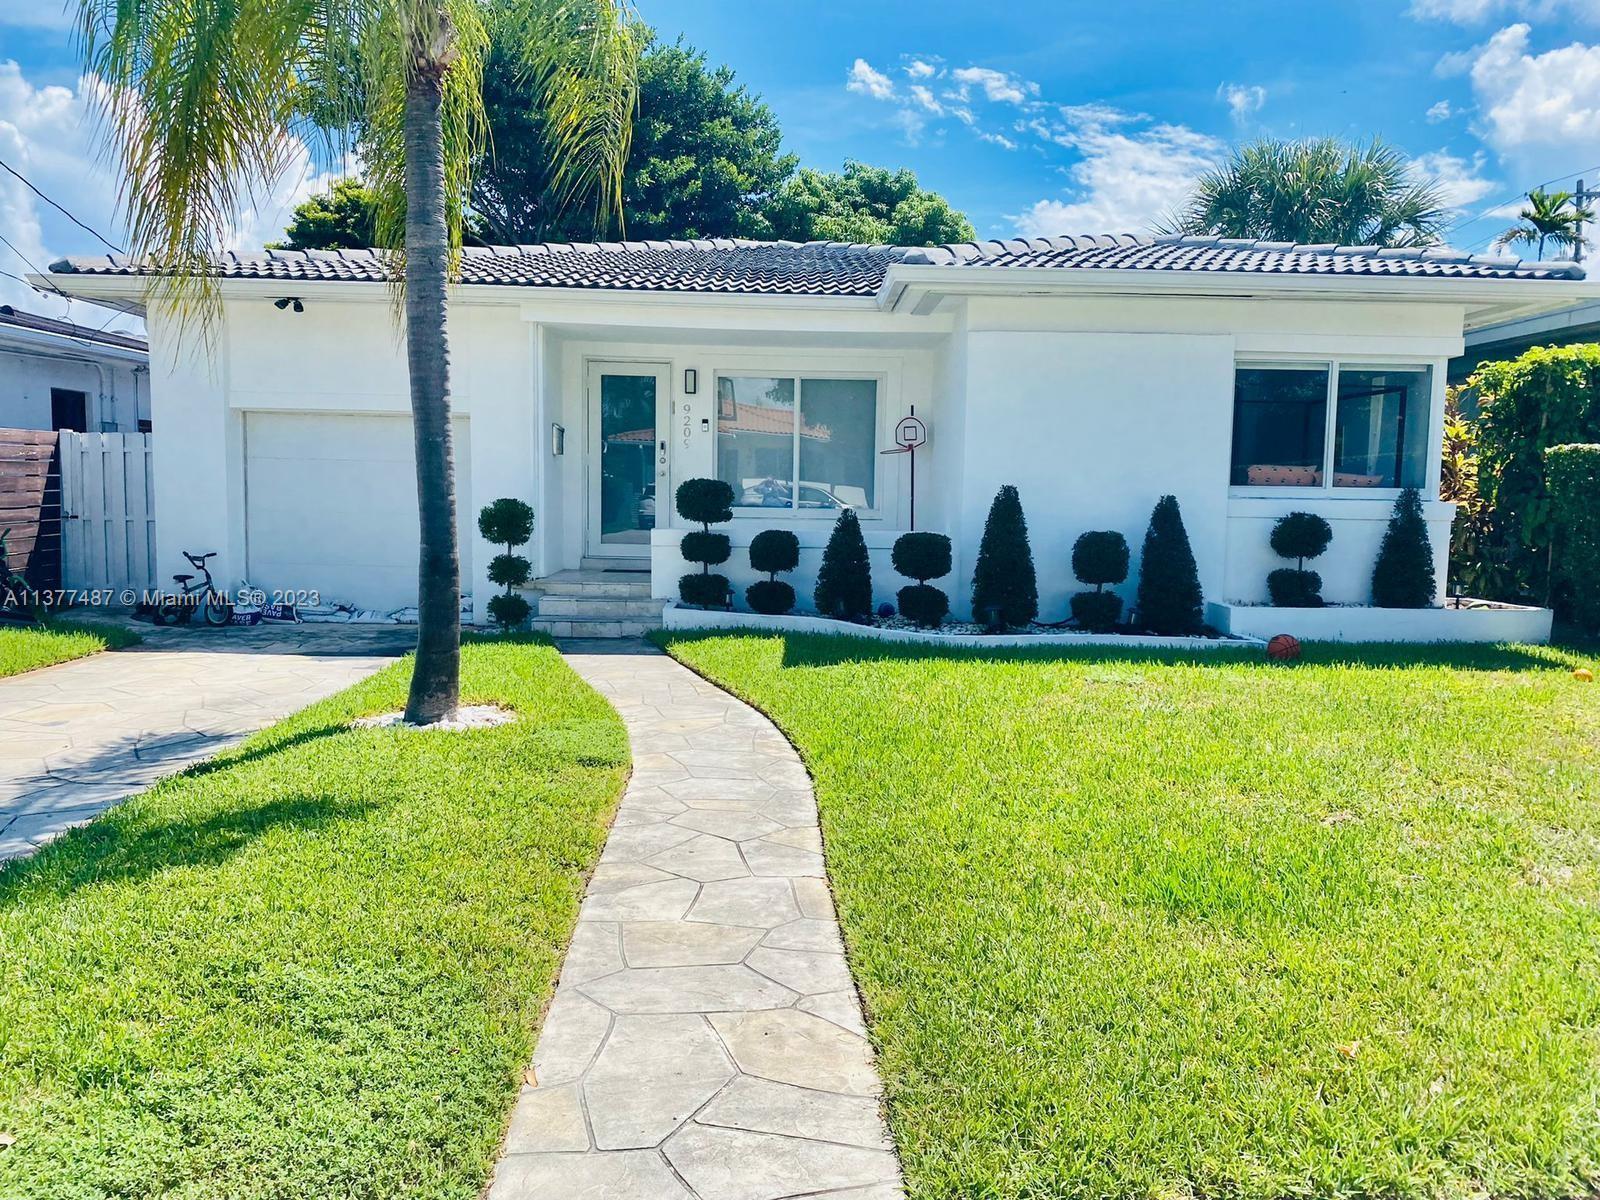 Location, Location, Location! Situated on one of the most coveted blocks in Surfside, this updated h